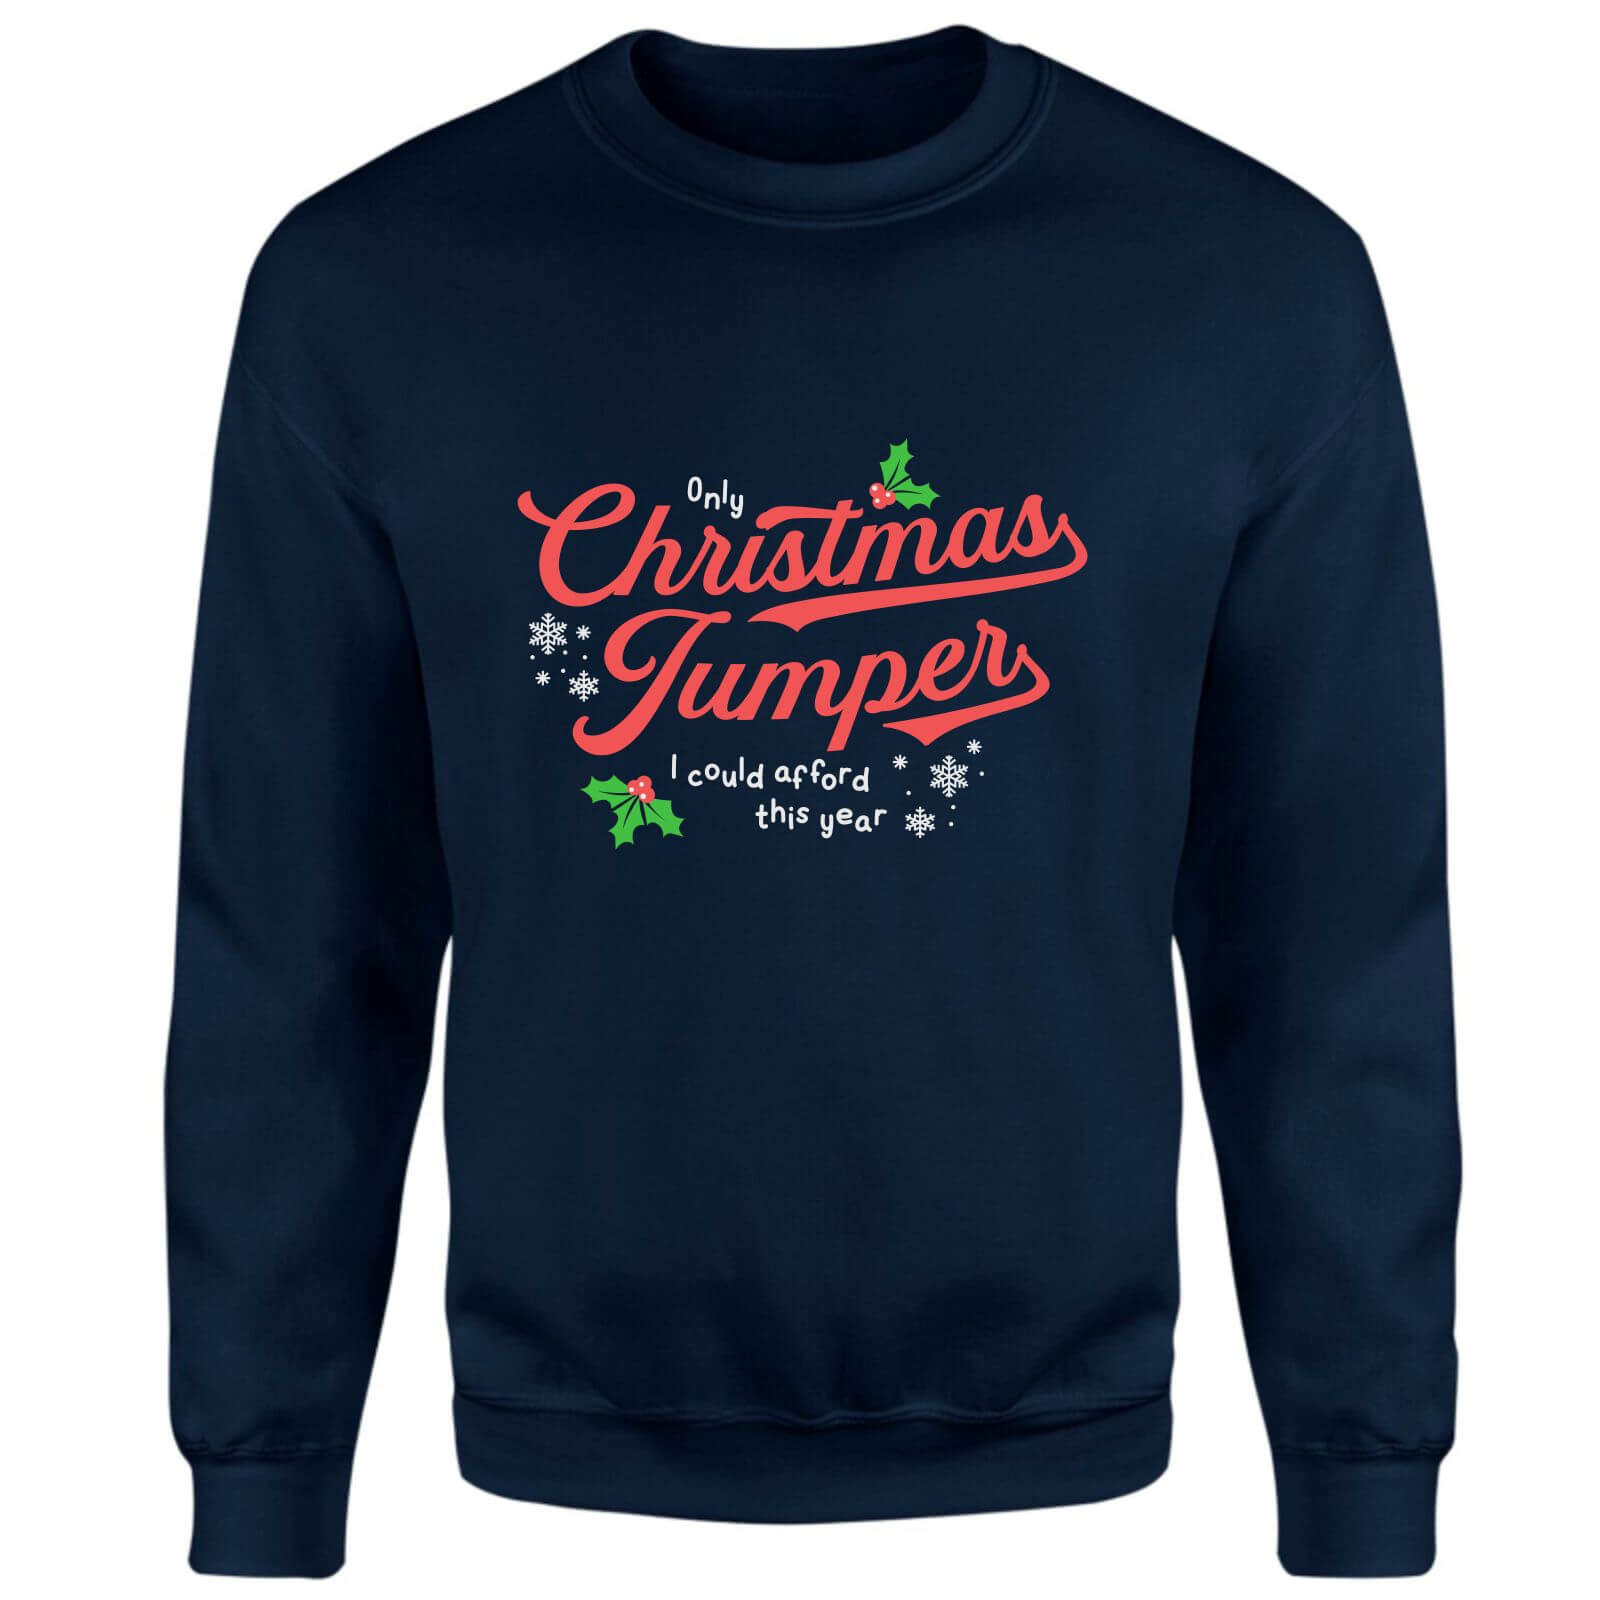 Only Christmas Jumper I Could Afford This Year Sweatshirt - Navy - XS - Navy